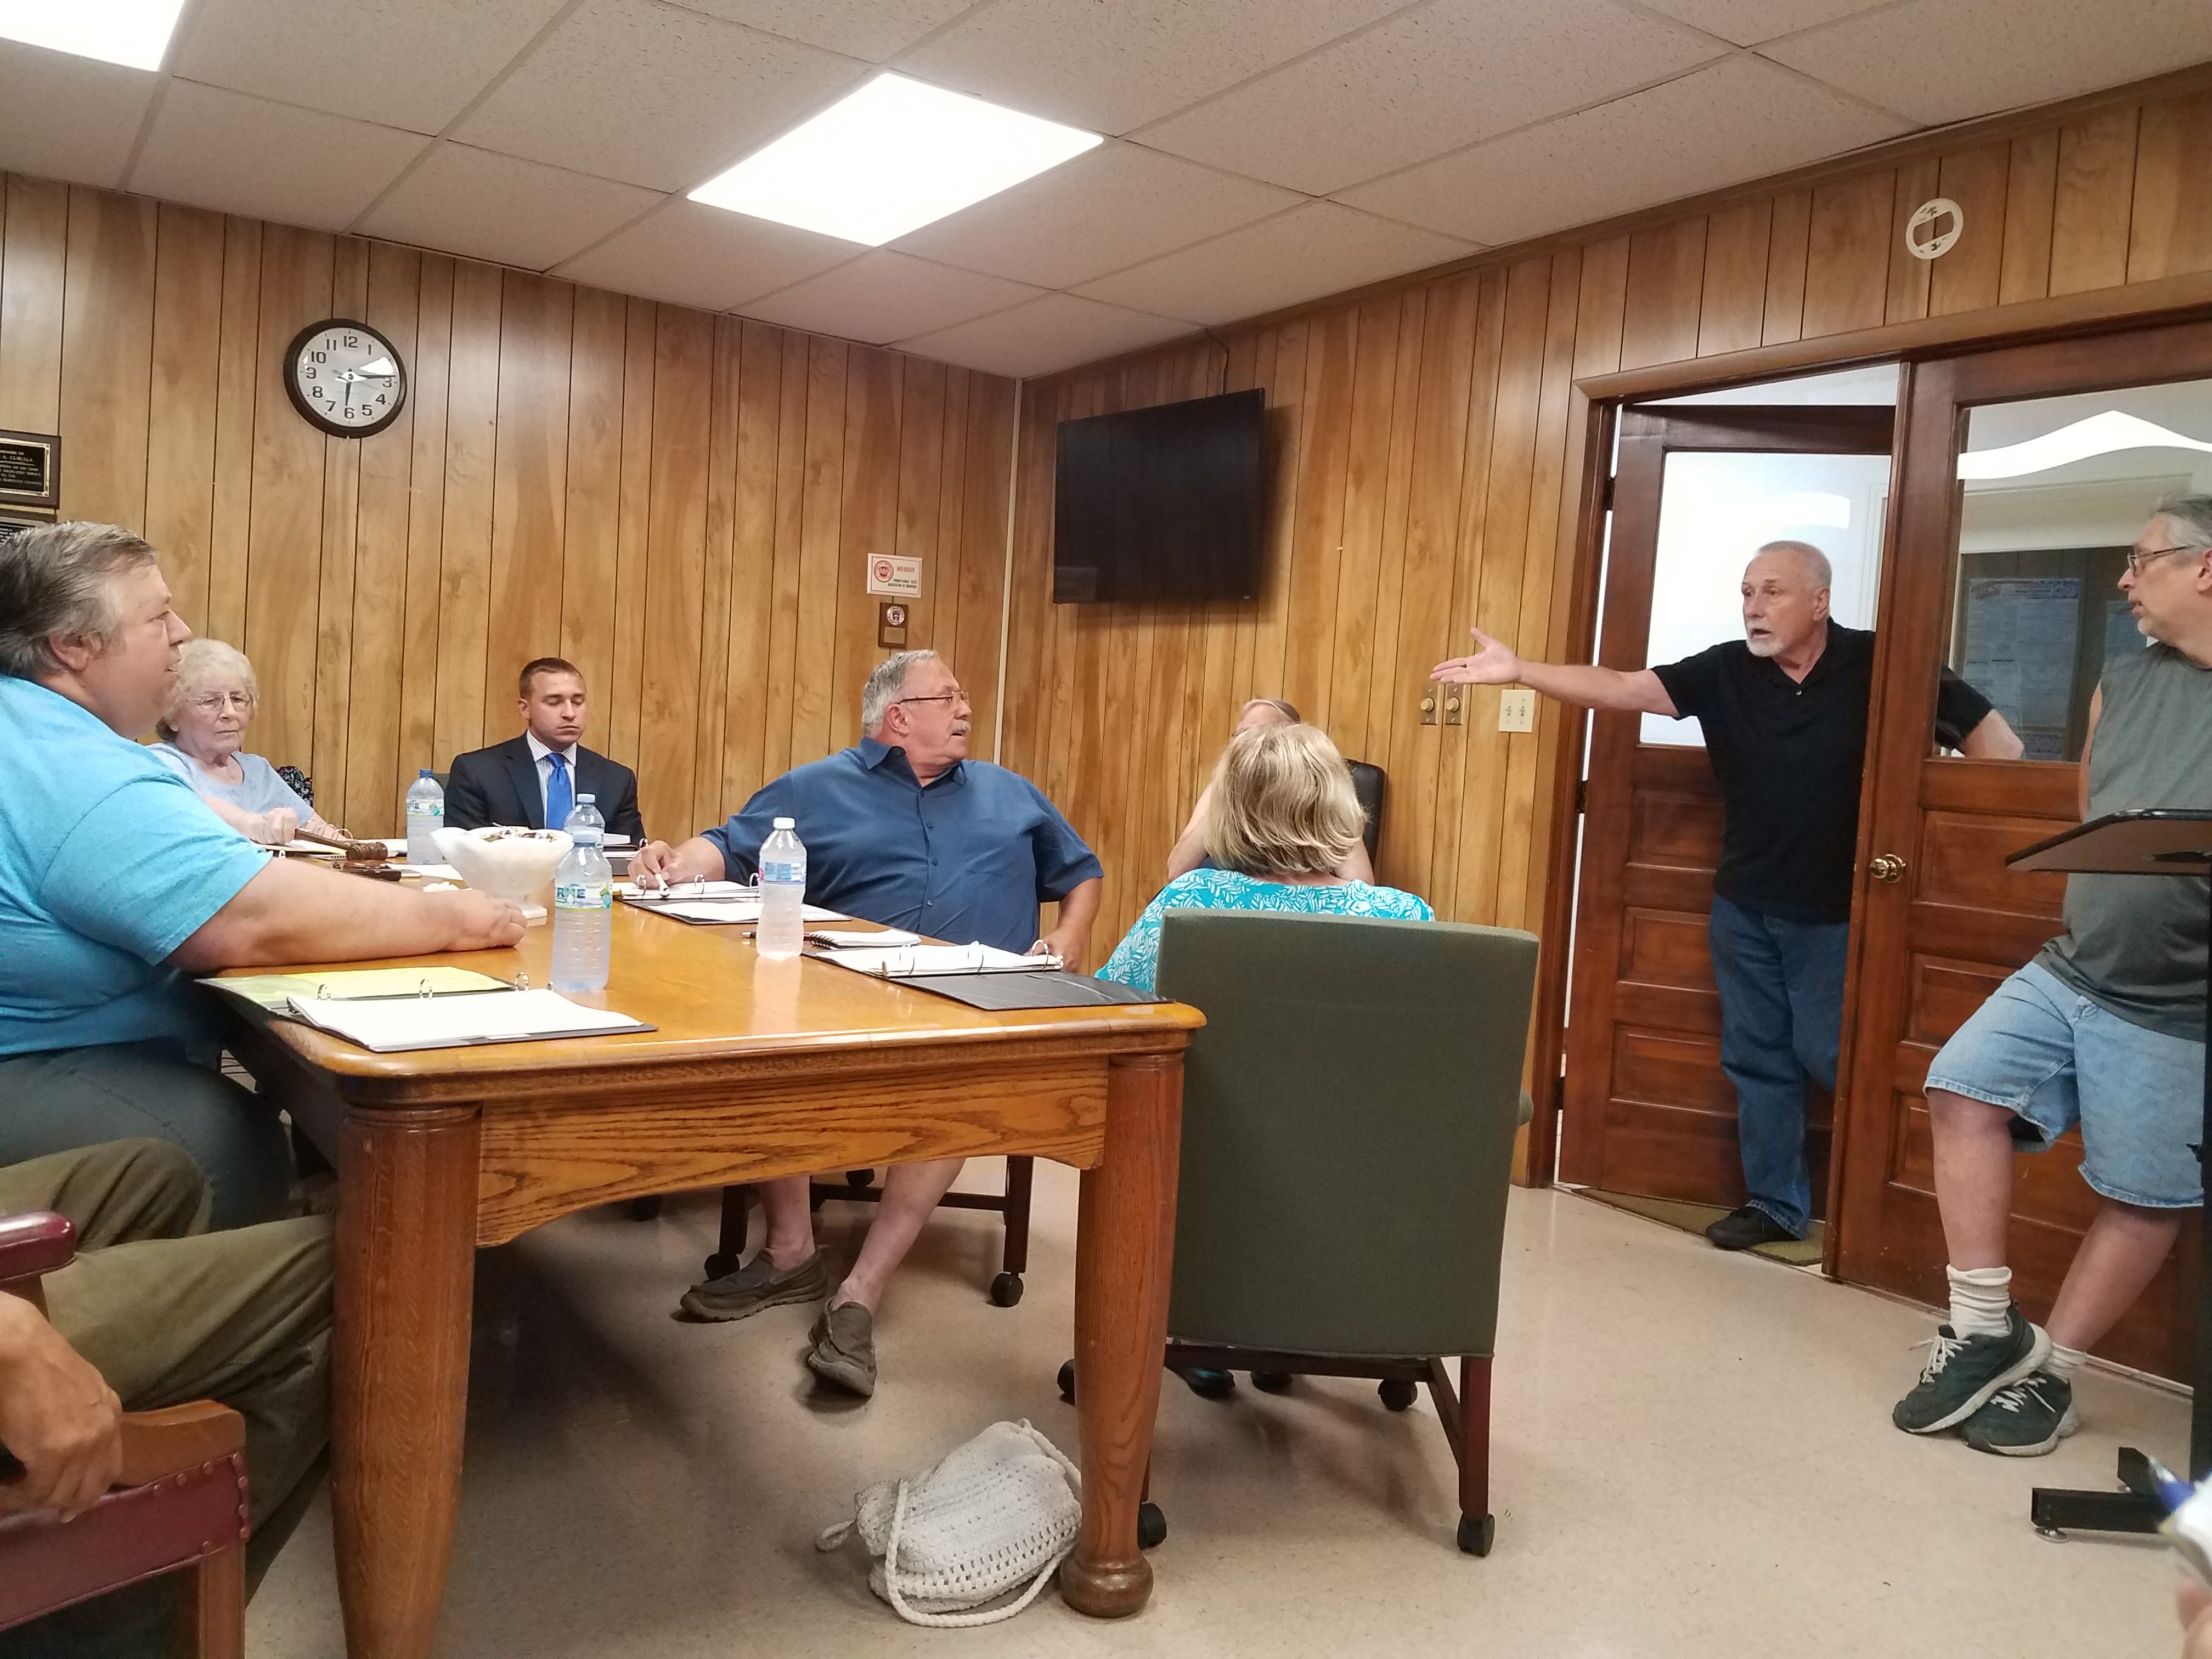 Tempers flared during Monday's Curwensville Borough Council Meeting. Major John Adams, (standing in doorway) declared that he was reinstating former Police Chief Mark Kelly. The council had voted 6-0 to terminate Kelly July 15. However, it is unclear whether Adams had the authority to reinstate the chief and the announcement lead to a heated exchange between Adams and Council Member Tom Carfley, left, seated. (Photo by Kimberly Finnigan)